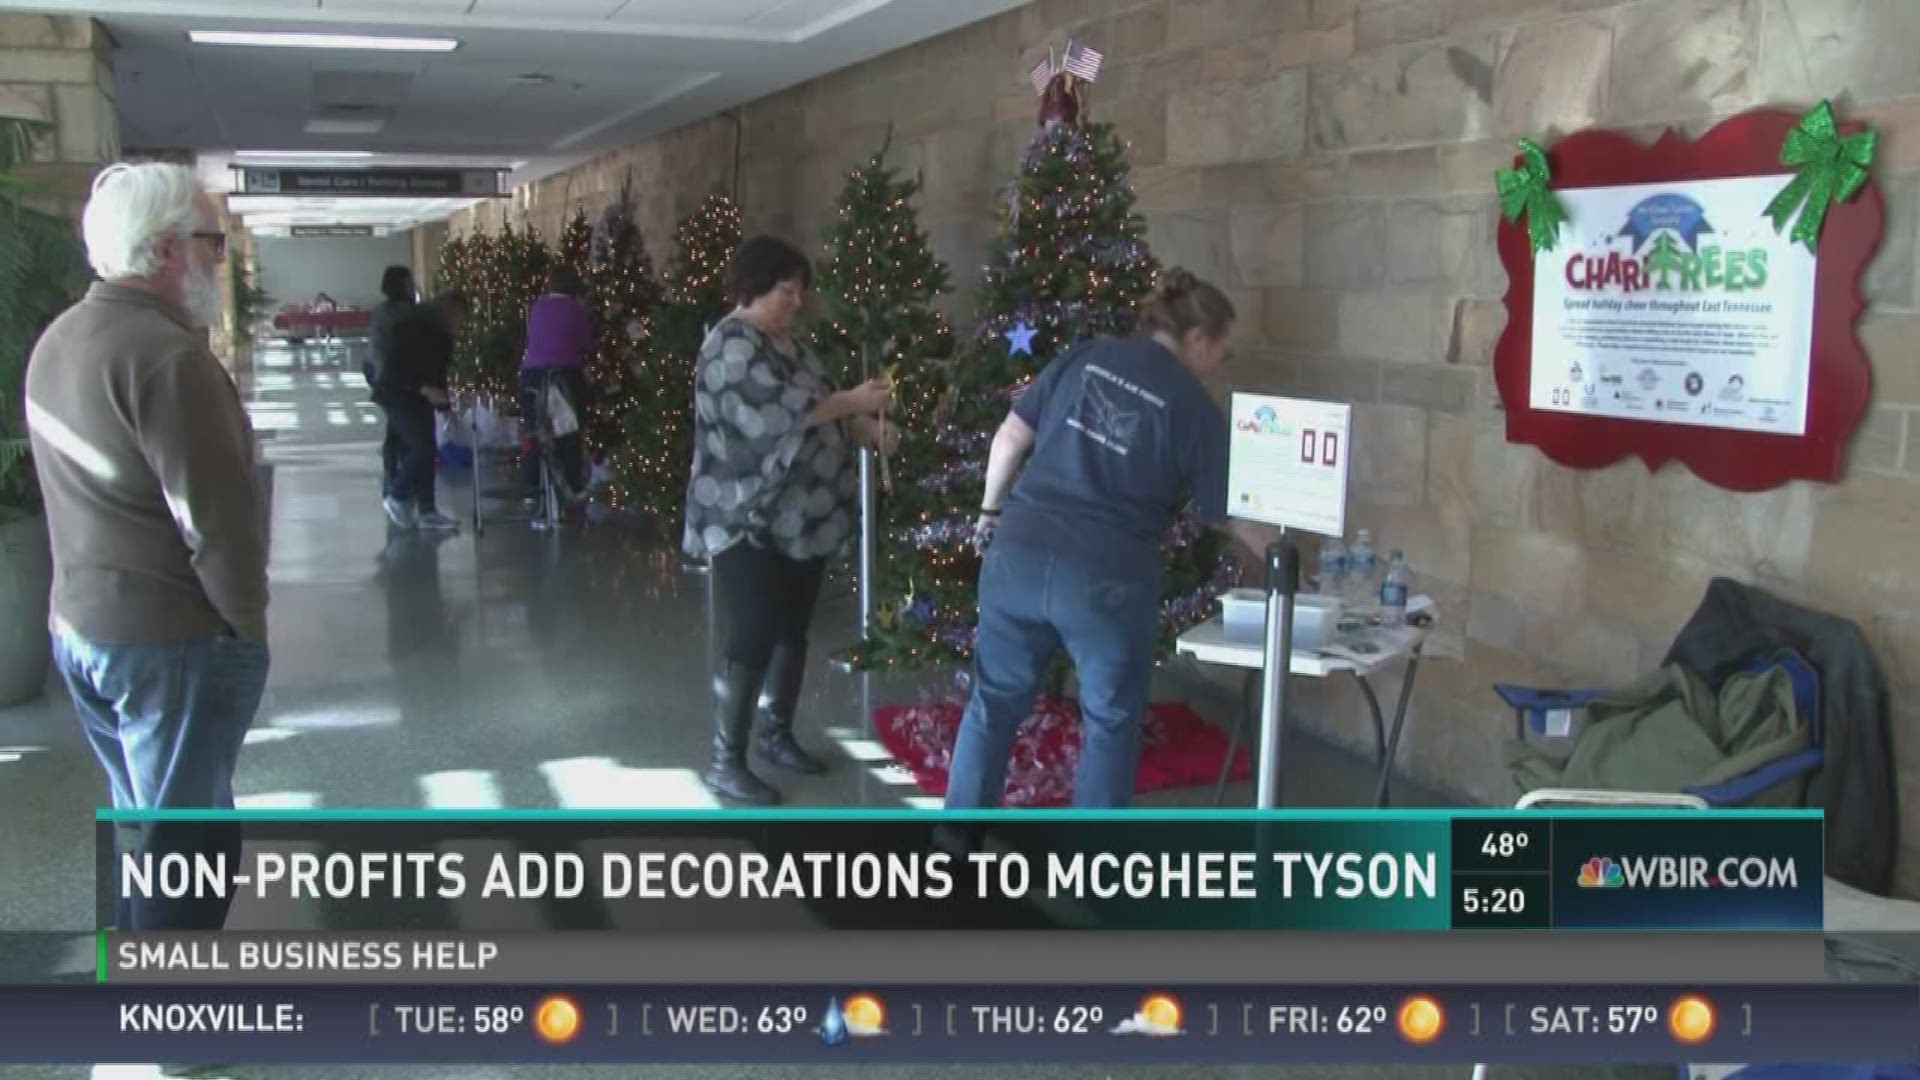 McGhee Tyson Airport is decorated for the holidays with 11 Christmas trees sponsored by local nonprofit organizations.